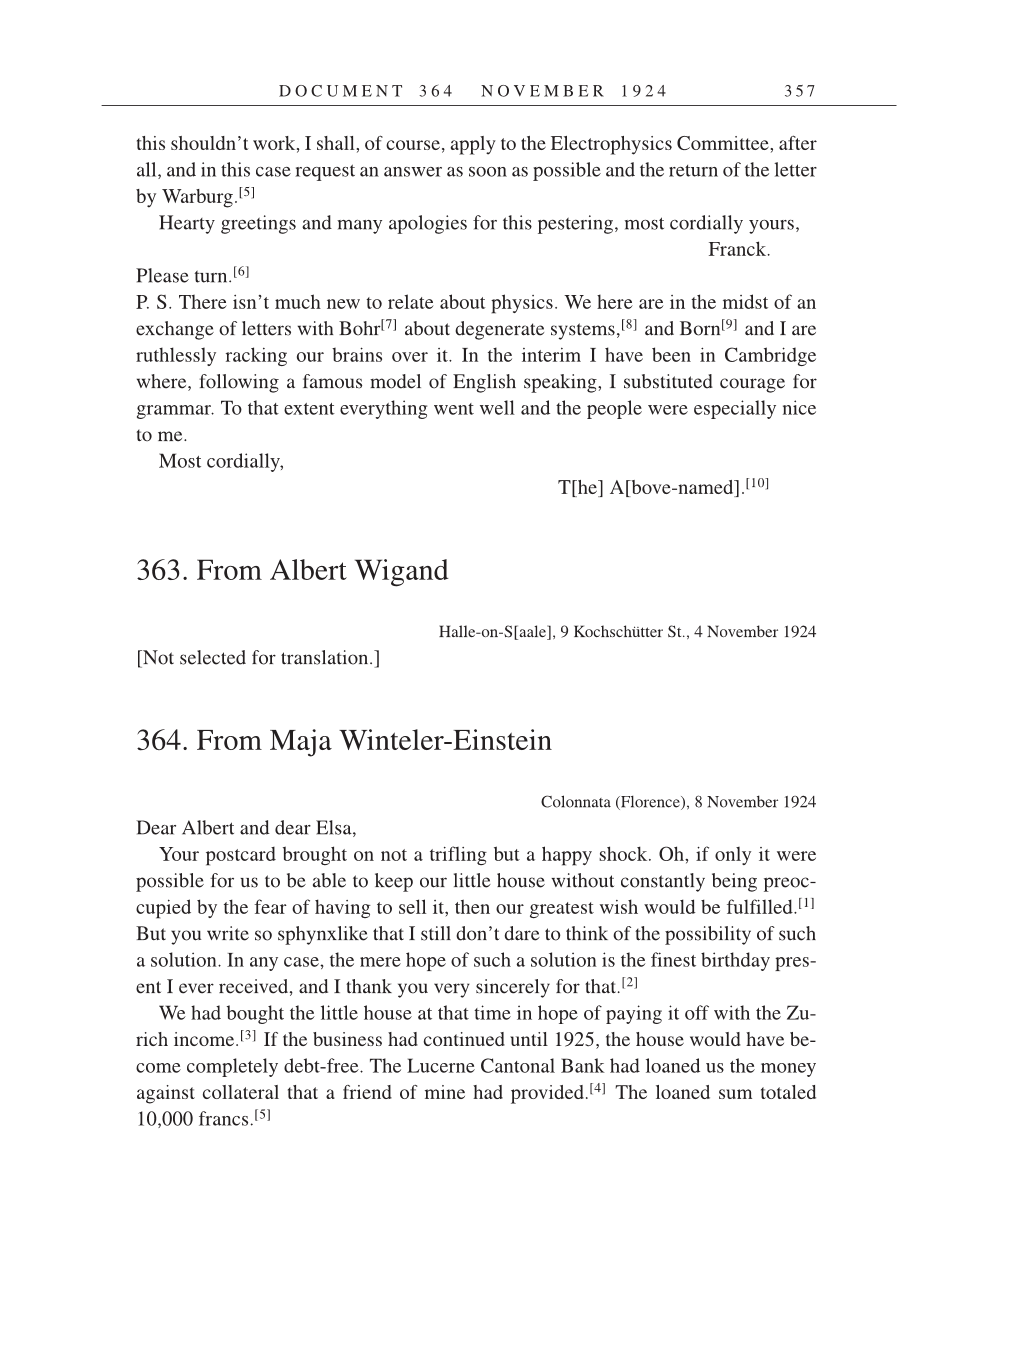 Volume 14: The Berlin Years: Writings & Correspondence, April 1923-May 1925 (English Translation Supplement) page 357